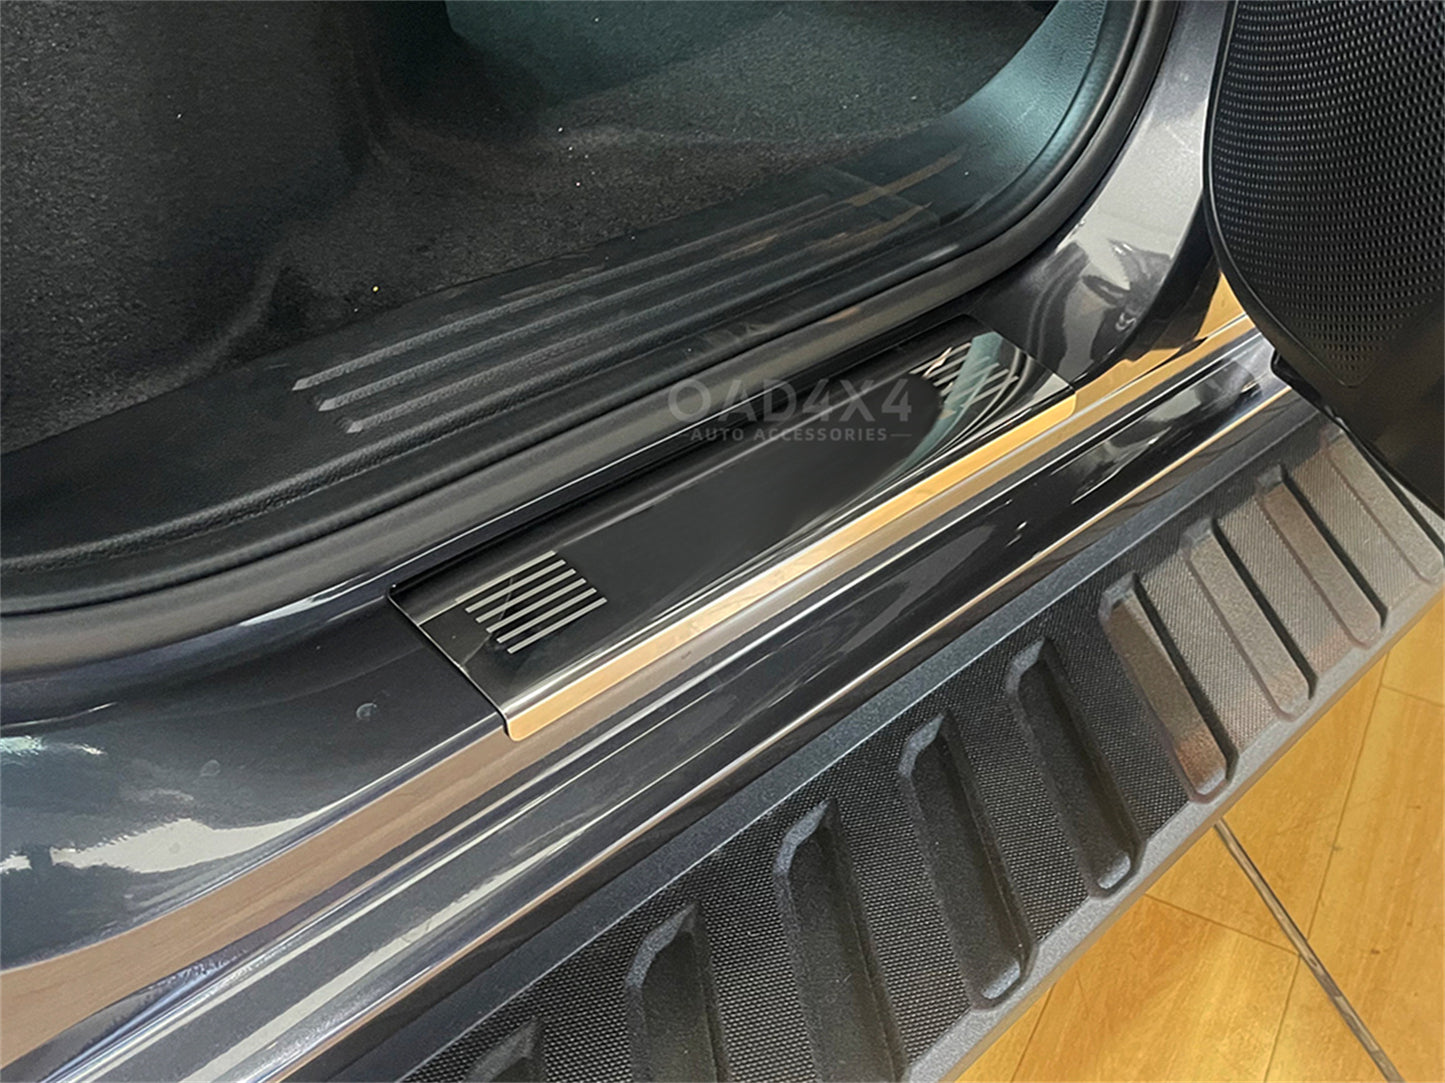 5D TPE Detachable Carpet Floor Mats & Stainless Steel Door Sills Protector for Ford Ranger Next-Gen Dual Cab 2022-Onwards Tailored Door Sill Covered Floor Mat Liner + Scuff Plates Protector